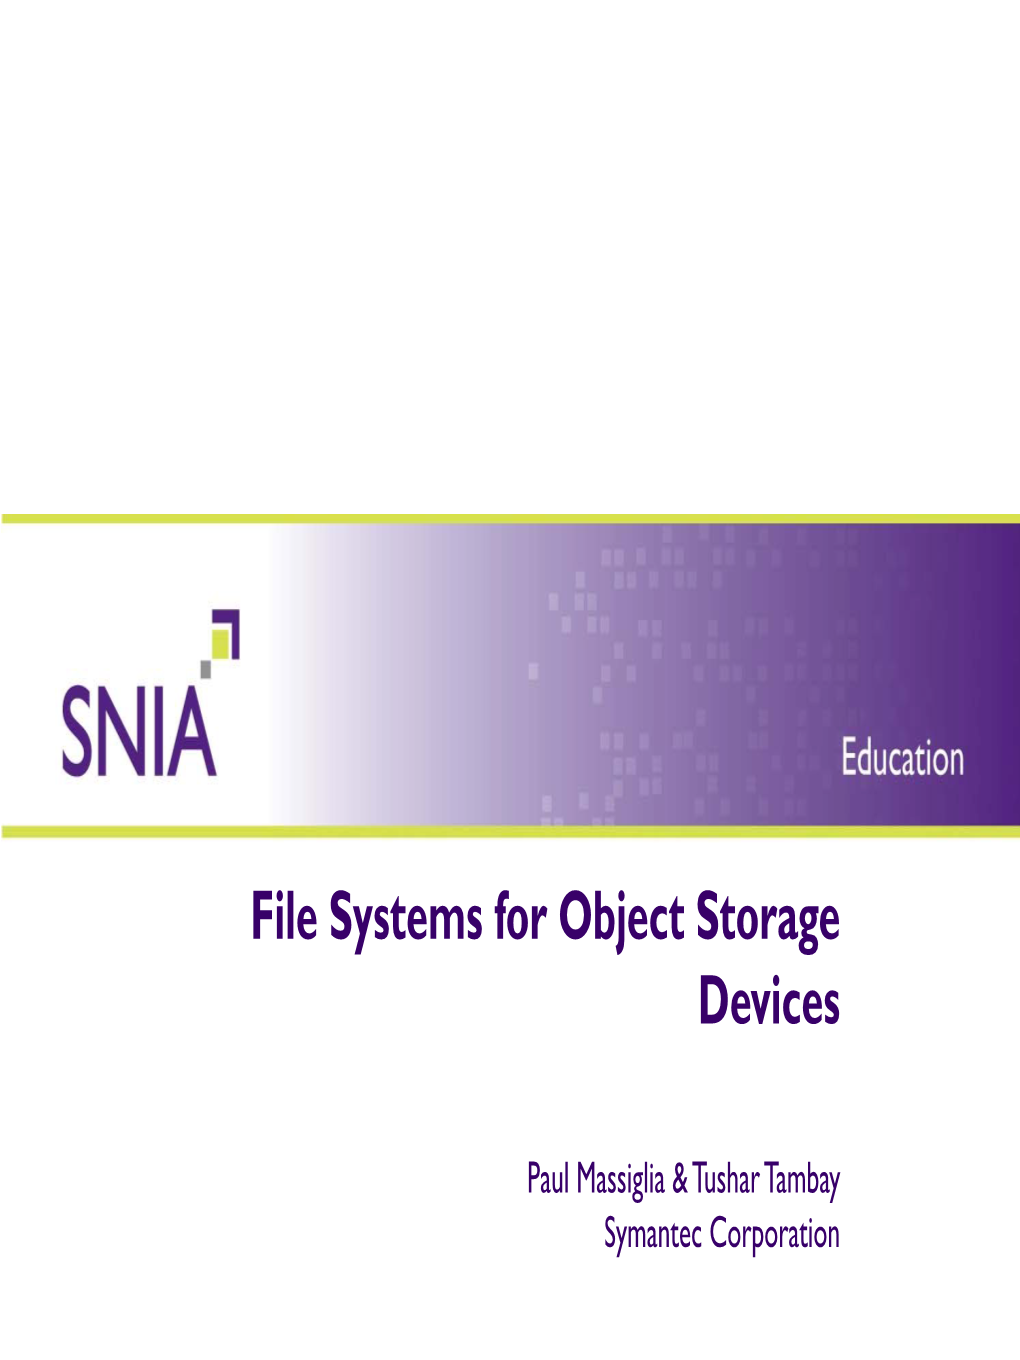 File Systems for Object Storage Devices